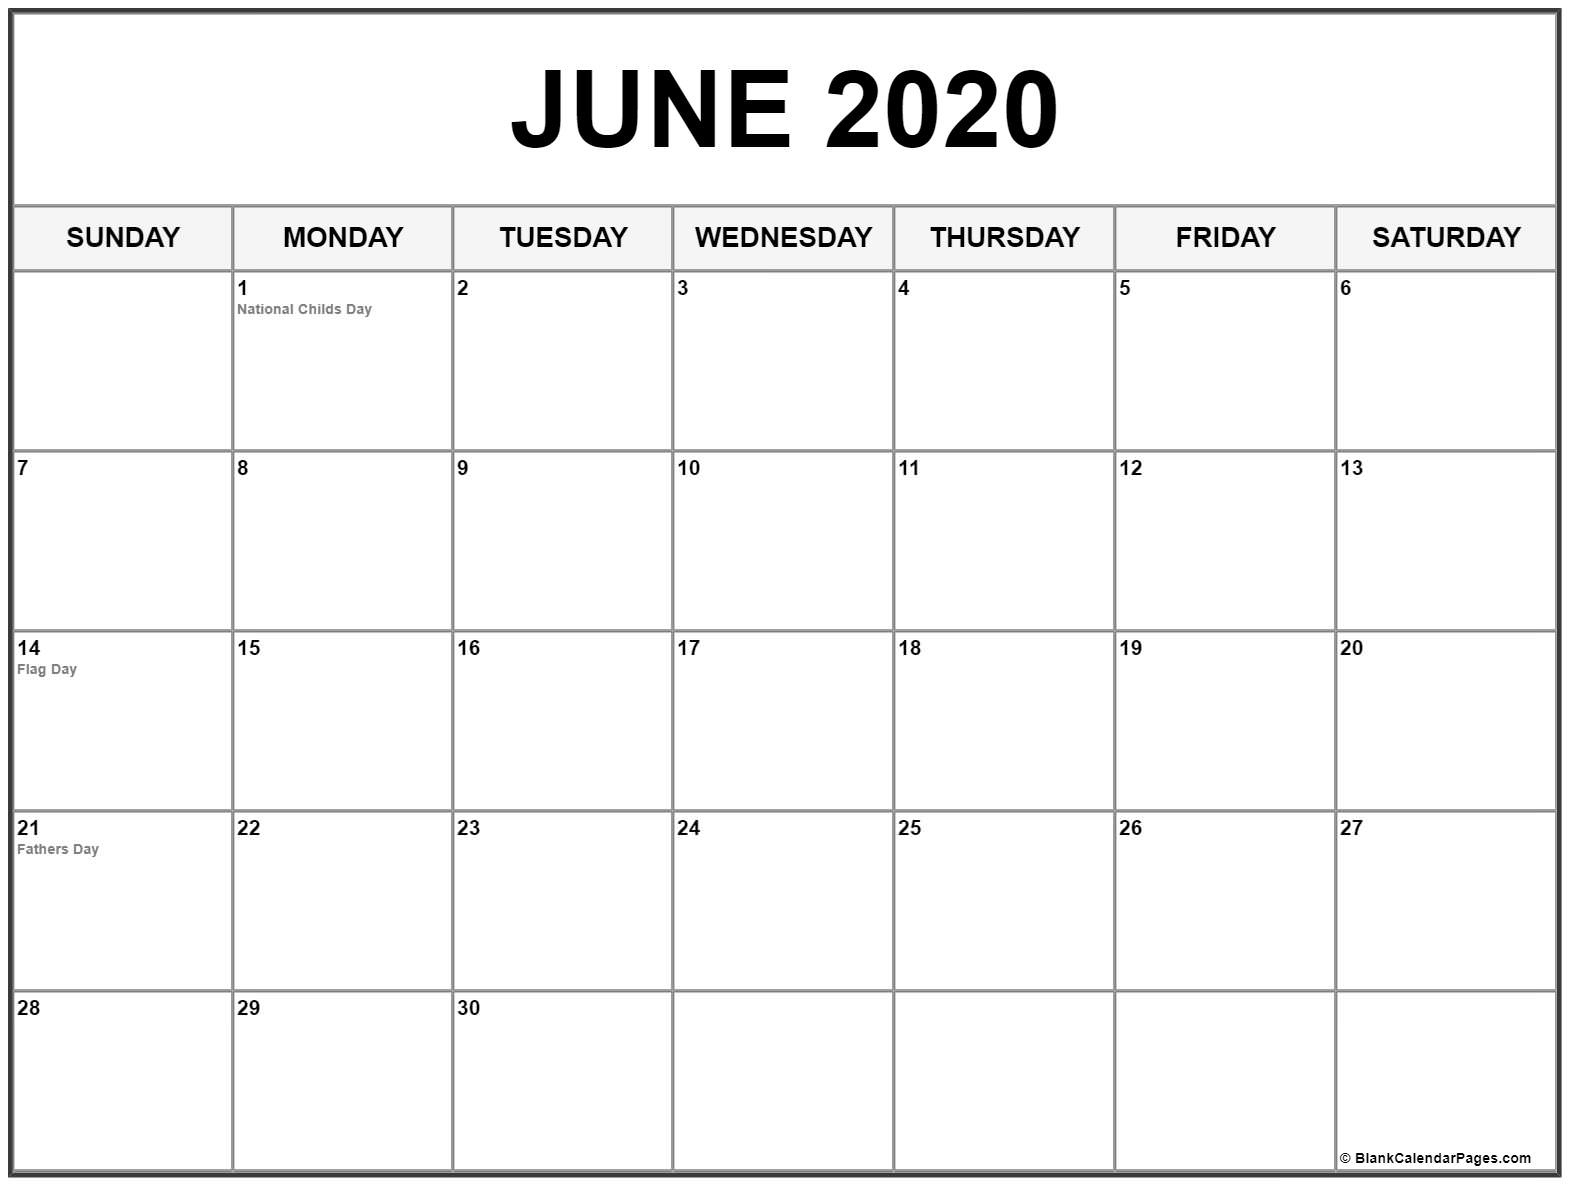 Collection Of June 2020 Calendars With Holidays Blank 2020 Calendar With Holidays Usa